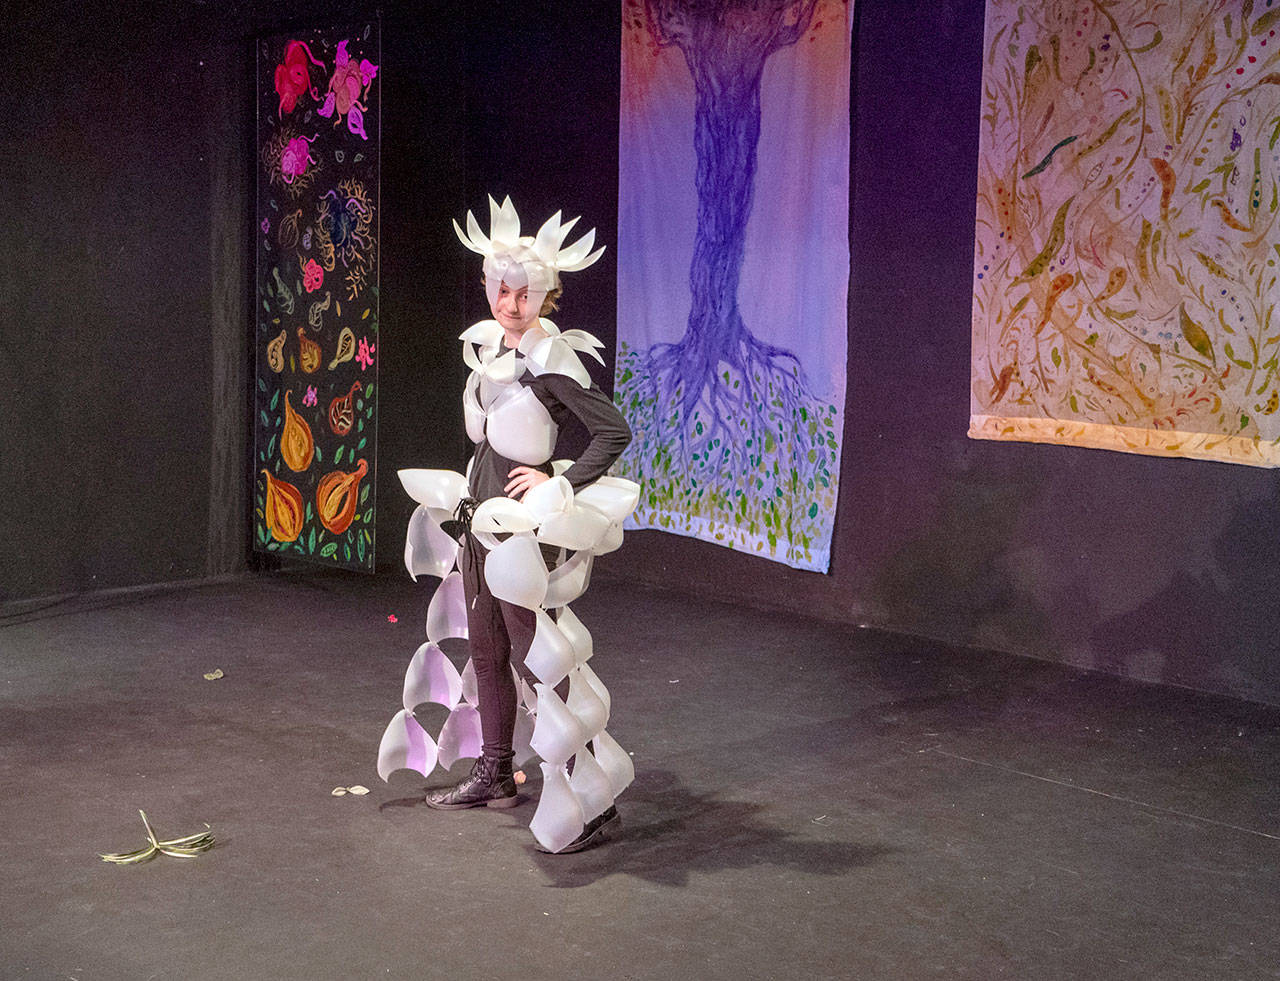 ‘Extinction Rebellion,’ shown by artist and model Natalie Grant during the Student Wearable Art Show at Key City Public Theatre in Port Townsend, won first prize in the show. (Steve Mullensky/for Peninsula Daily News)